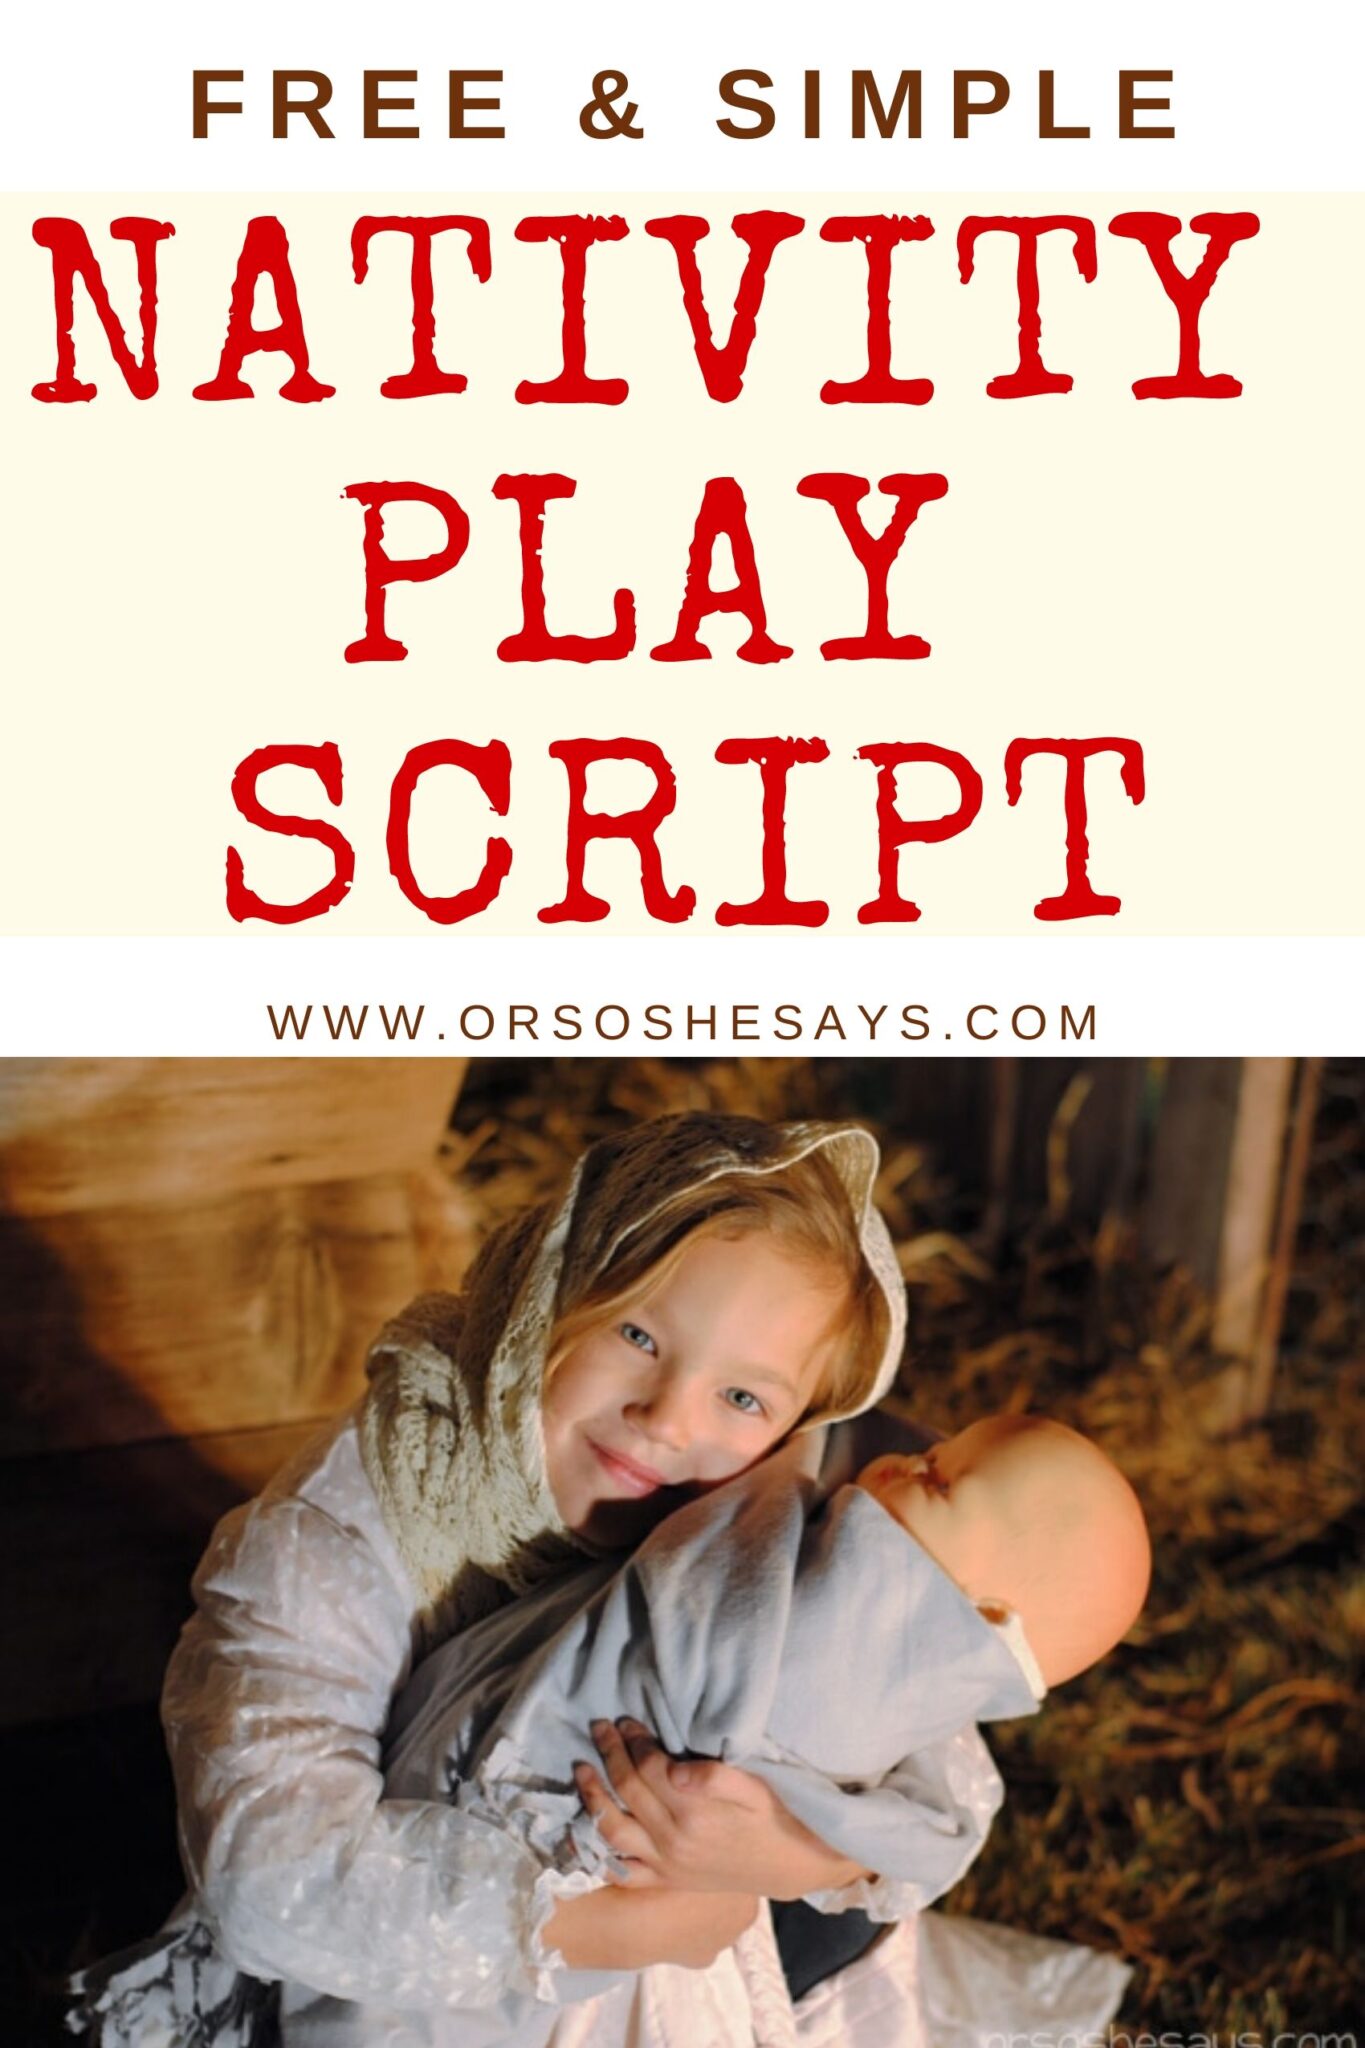 simple-nativity-play-script-for-children-totally-free